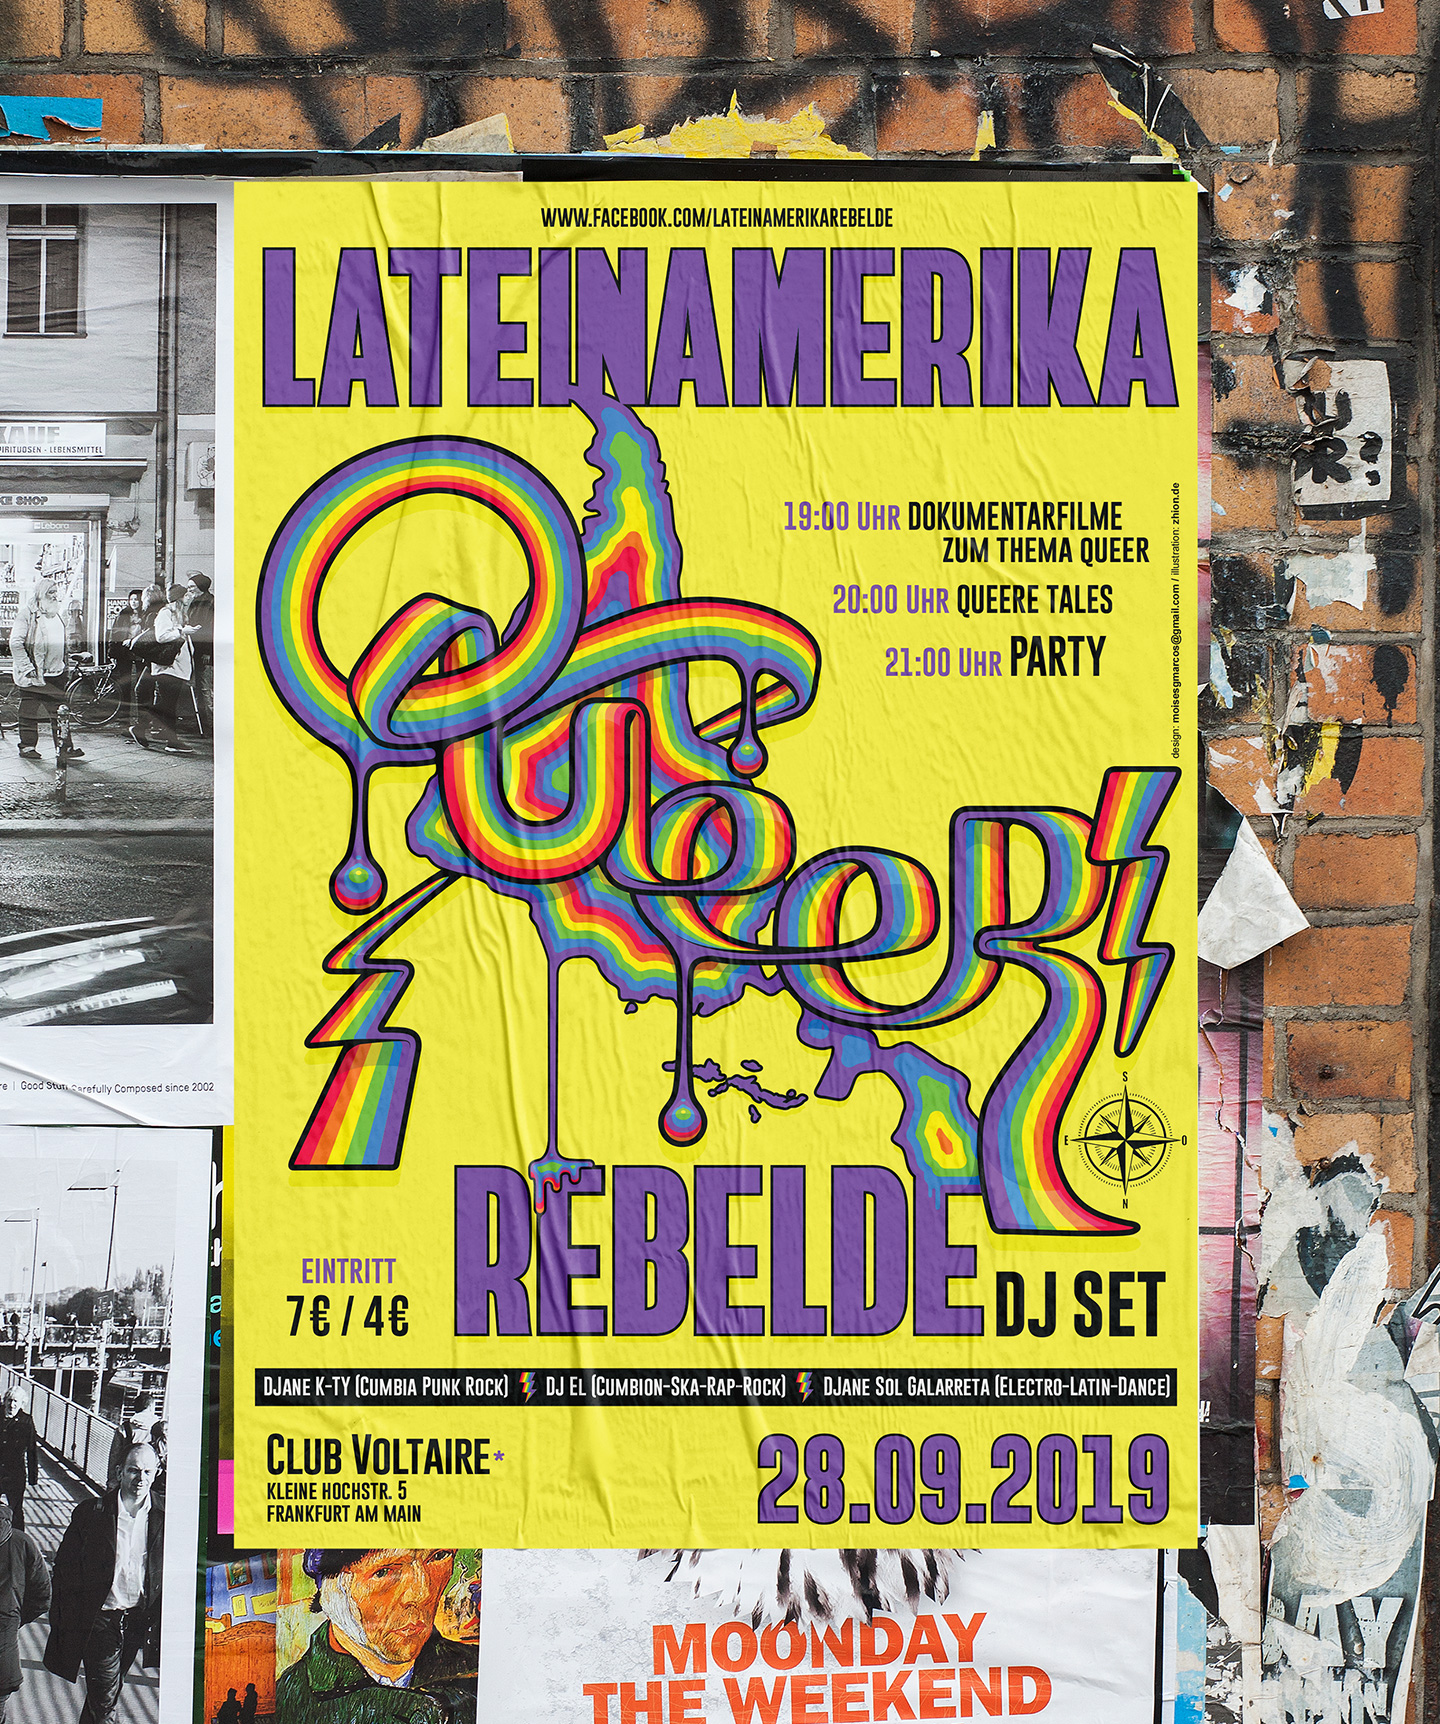 illustration_andre_levy_zhion_vector_pop_queer_type_rainbow_latin_america_dripping_rebelde_poster_event.jpg